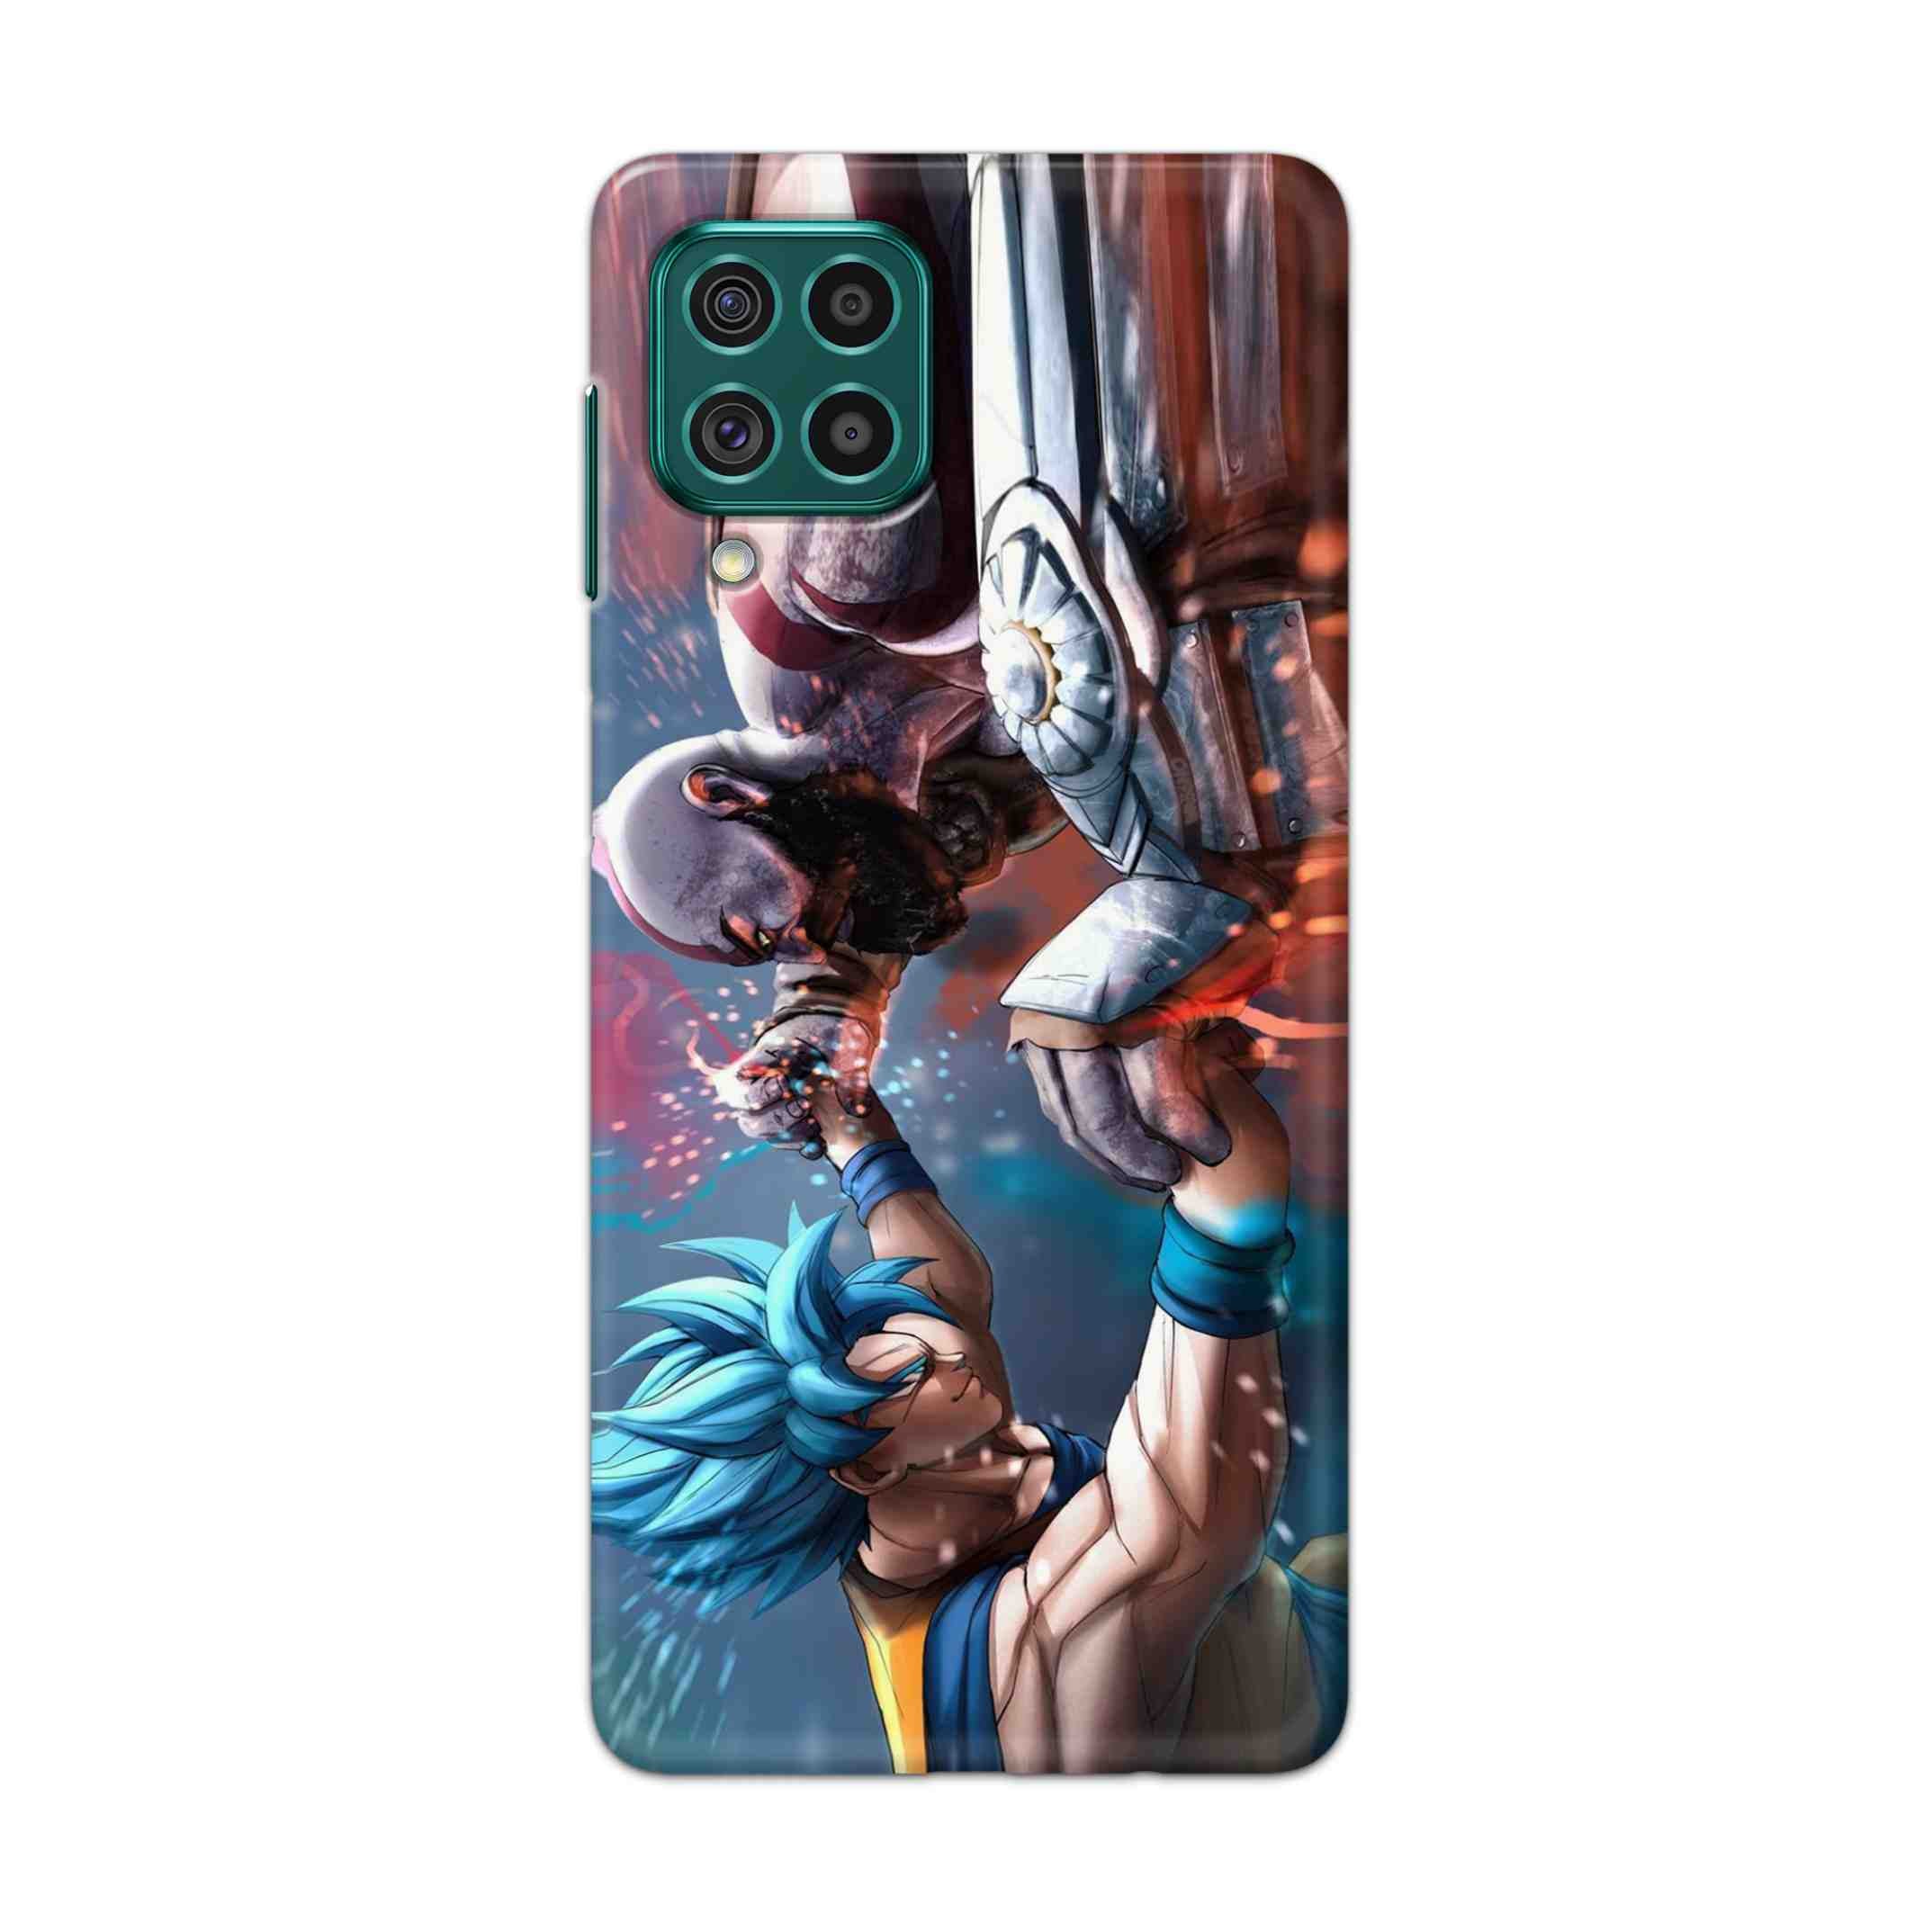 Buy Goku Vs Kratos Hard Back Mobile Phone Case Cover For Galaxy F62 Online